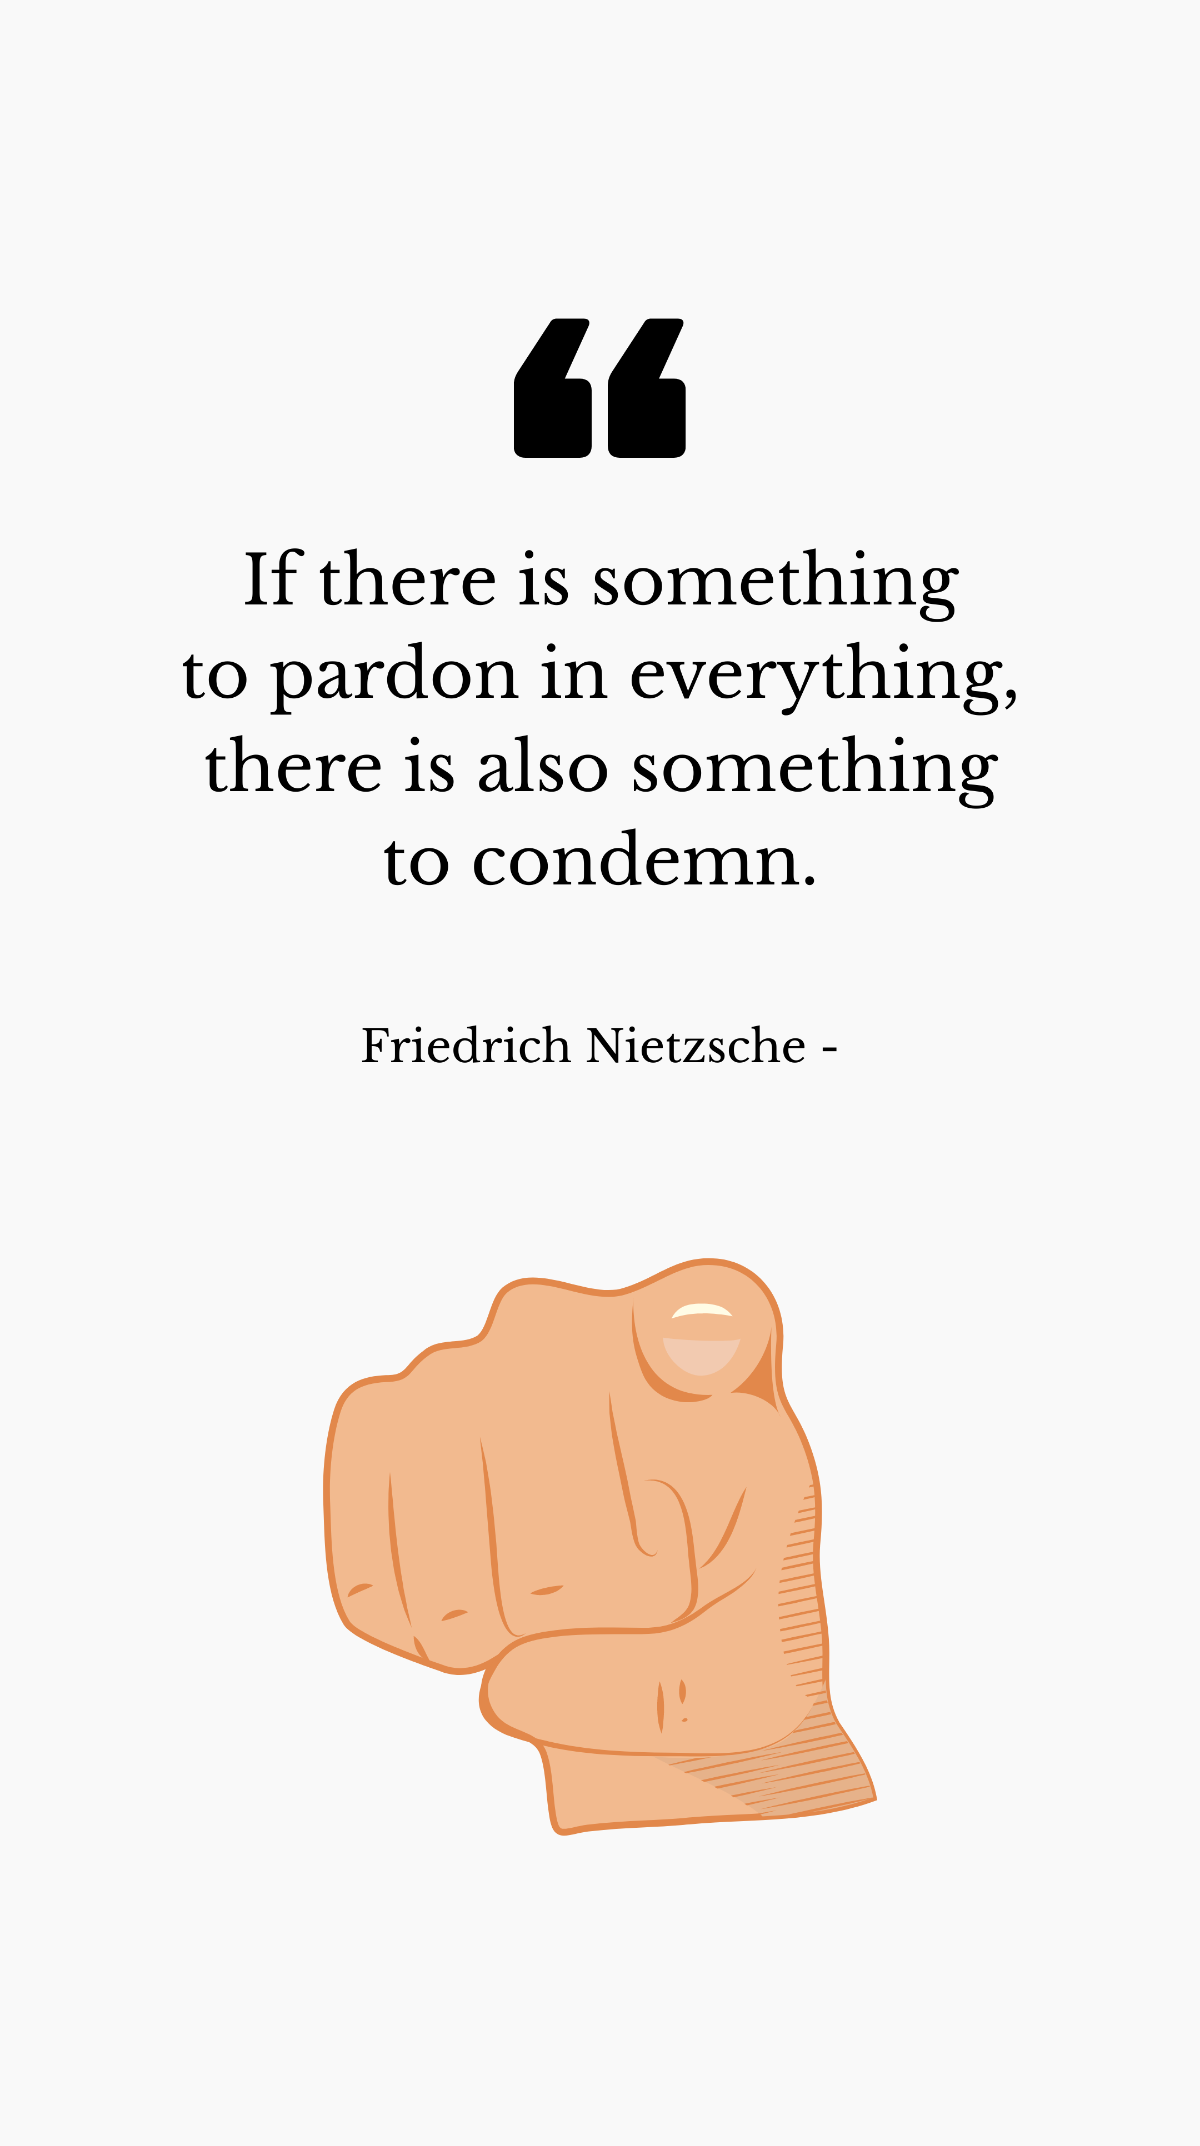 Free Friedrich Nietzsche - If there is something to pardon in everything, there is also something to condemn. Template